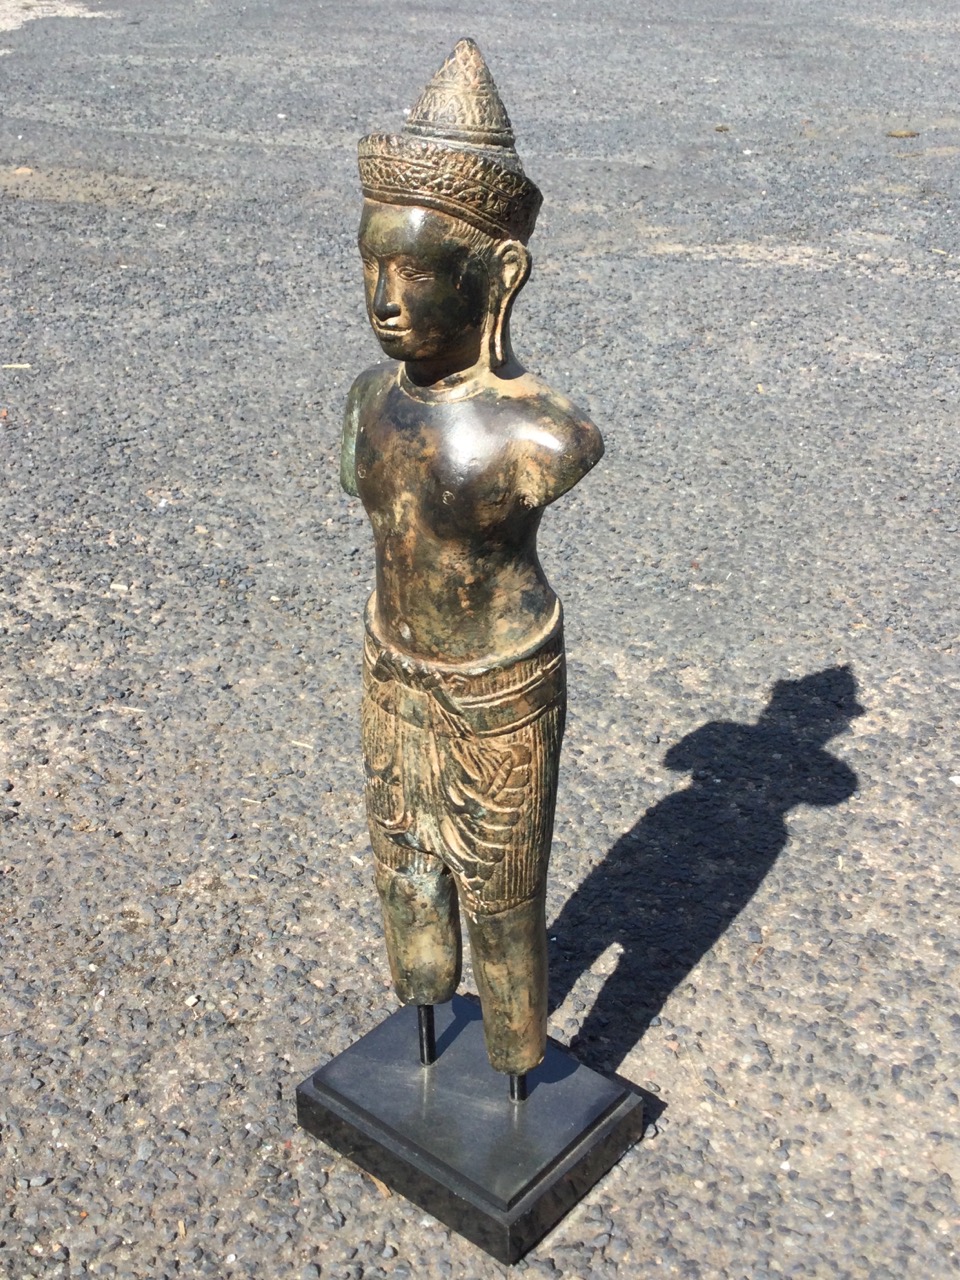 A C12th style Khmer bronze standing male figure, wearing headdress with chignon carved with foliage,